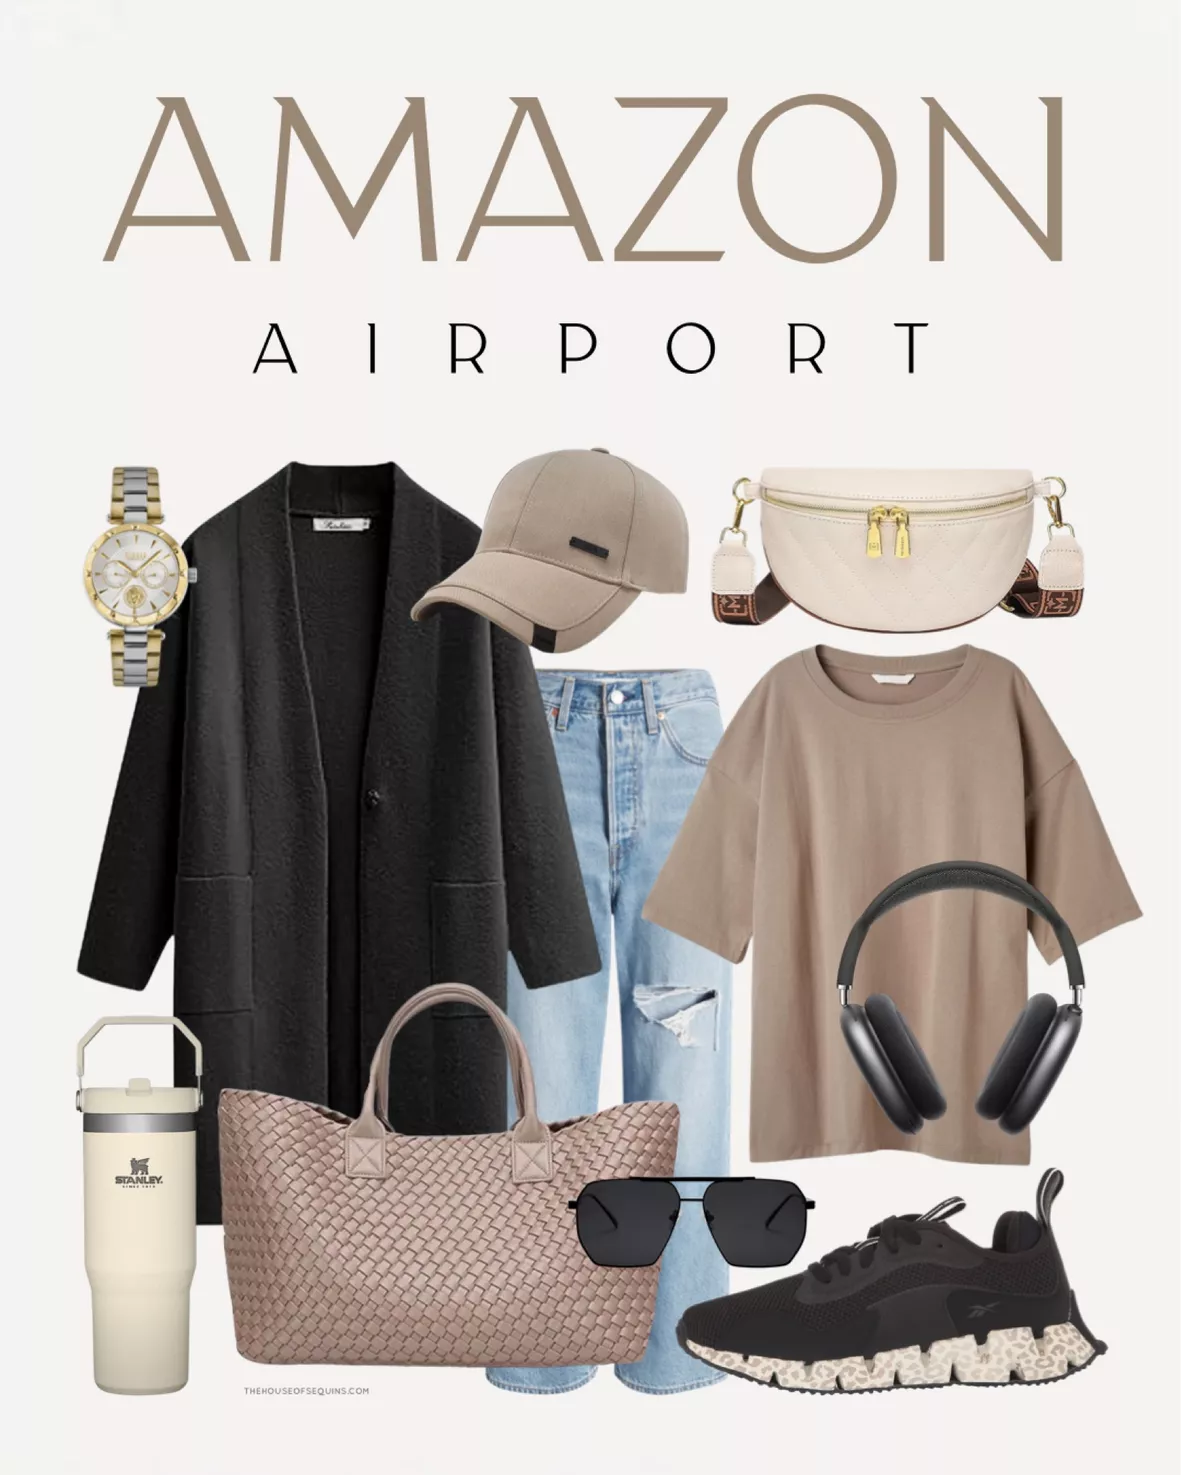 How to shop for a travel wardrobe